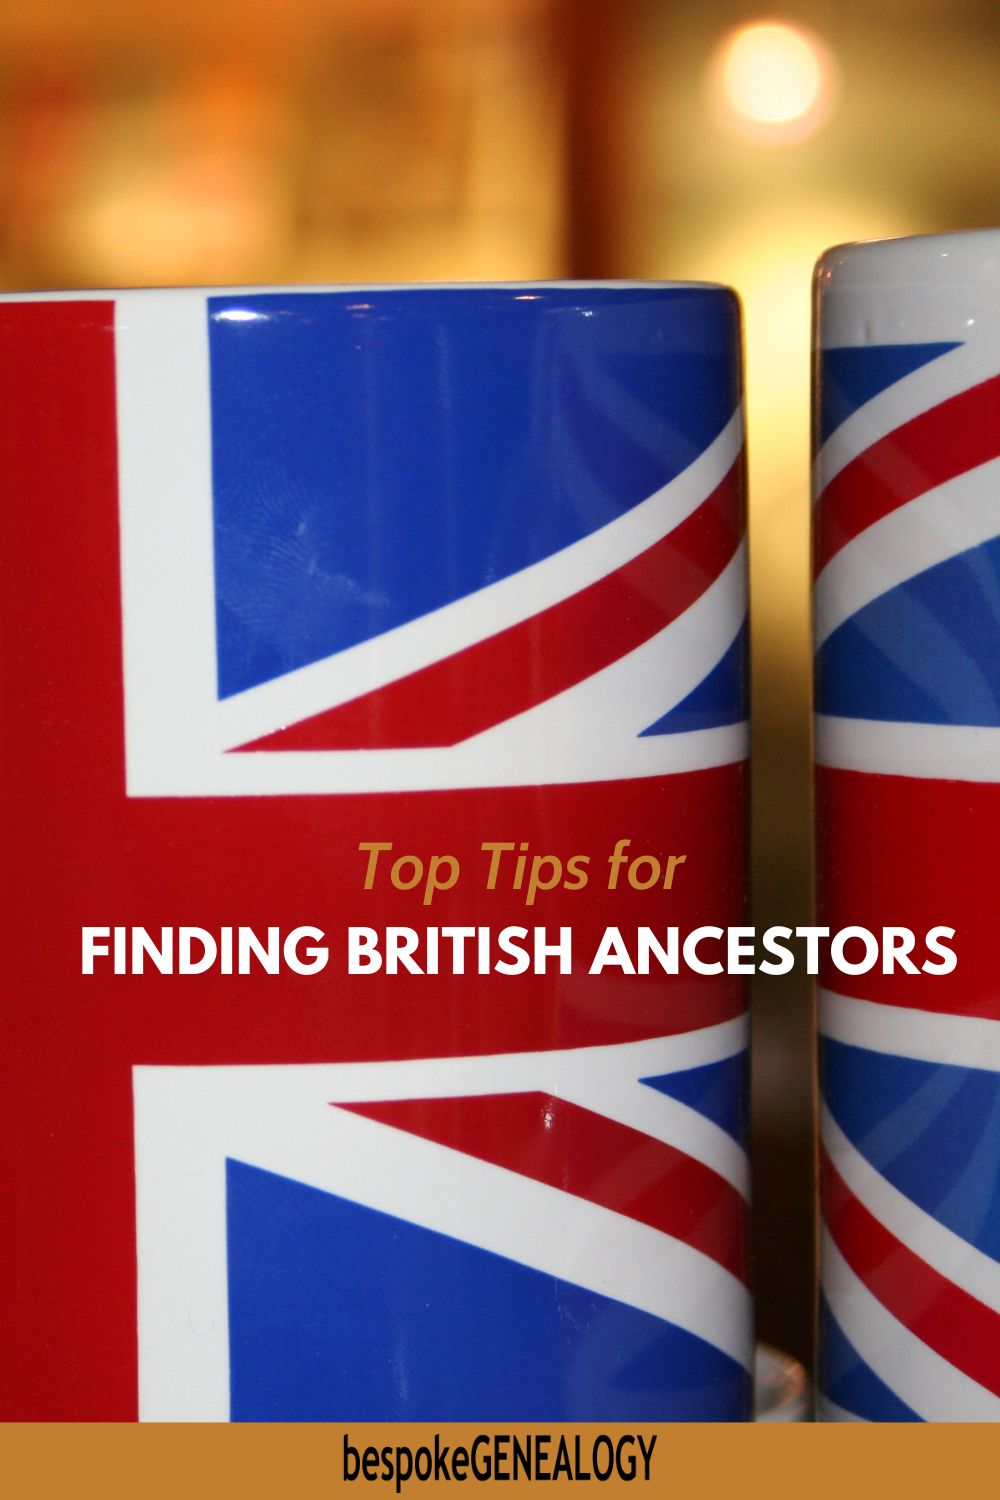 Top tips for finding British ancestors. Close up photo of two mugs in British flag colors.